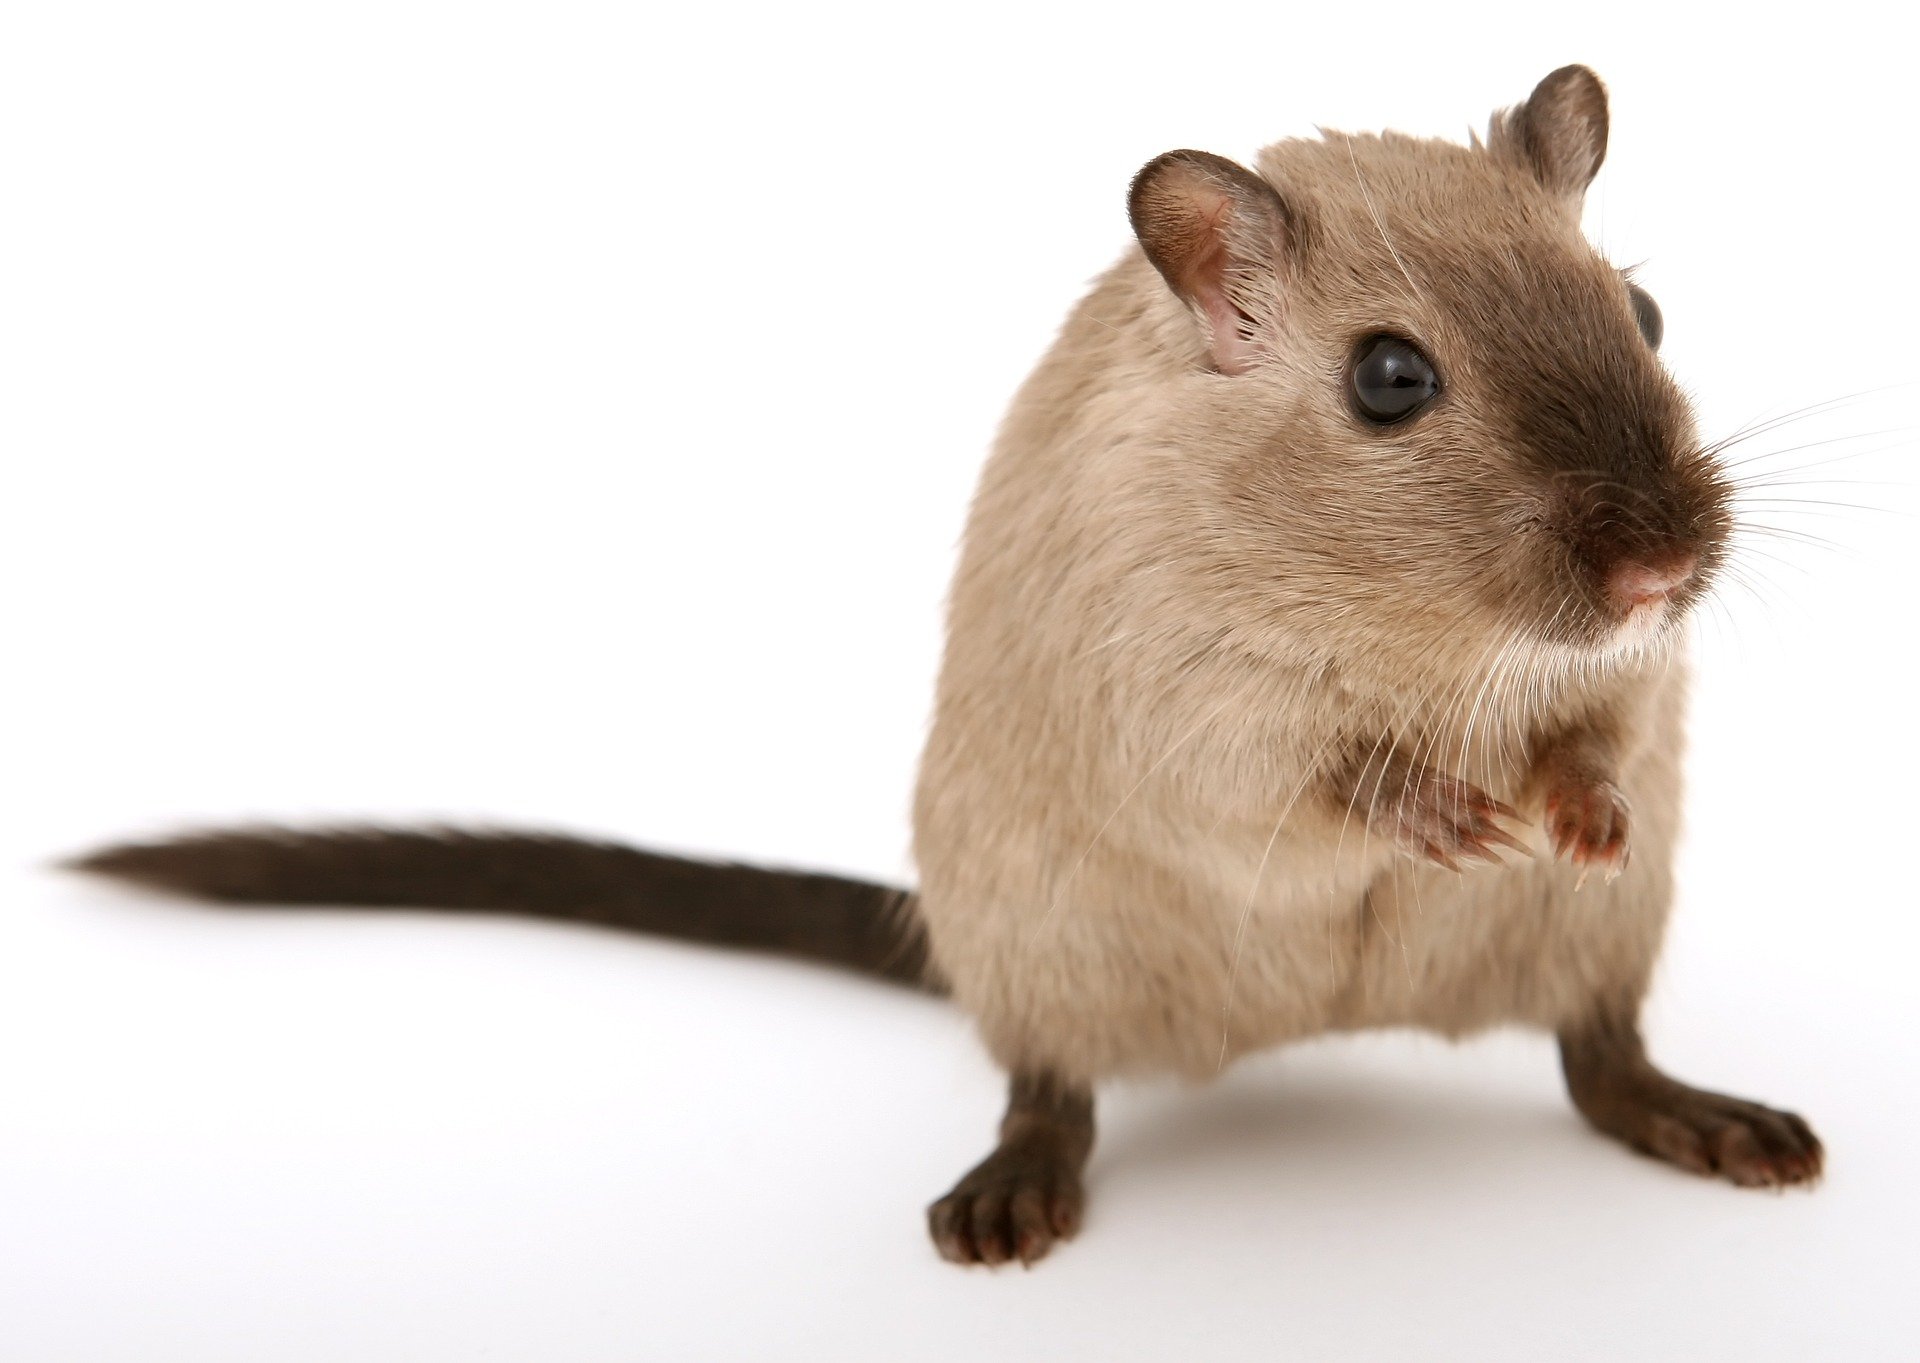 mice and rodent removal calgary, mice exterminator near me in calgary, mice control in Calgary